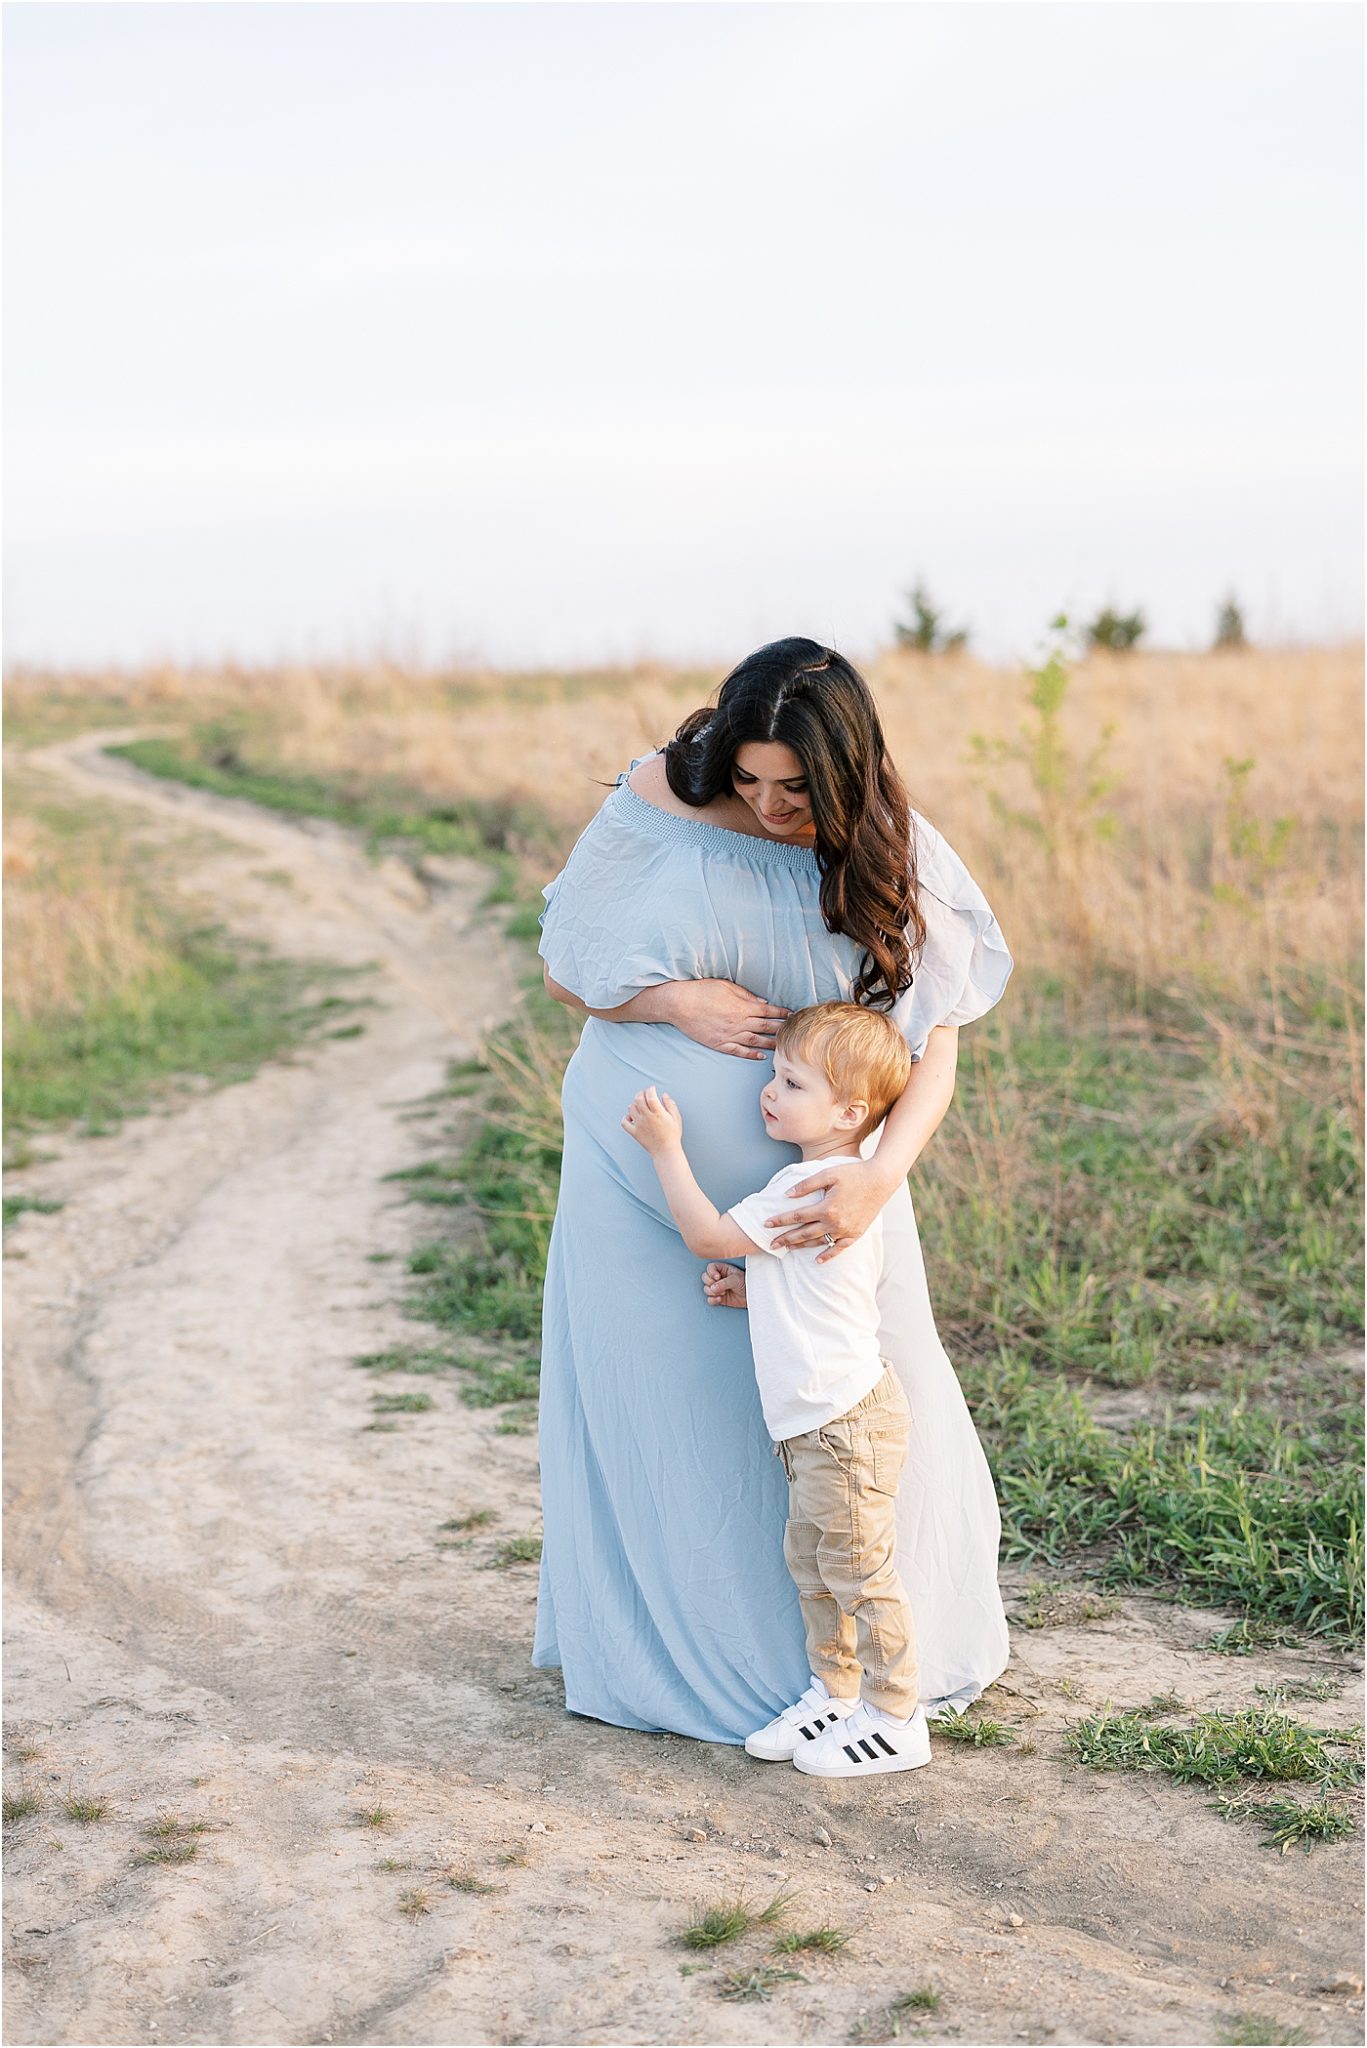 Big brother hugging Mom's belly during maternity session with Lindsay Konopa Photography.